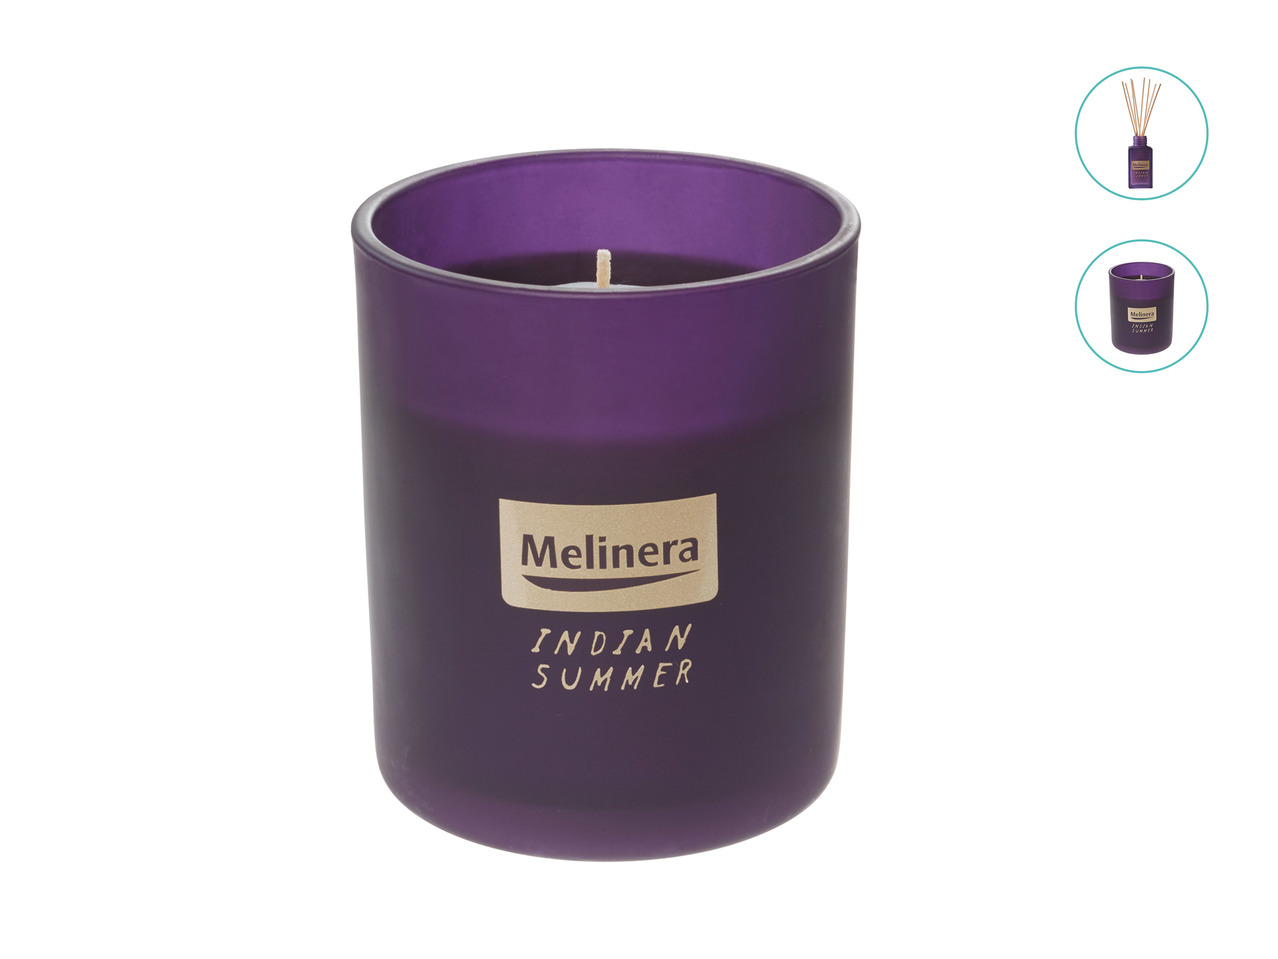 Melinera Scented Candle or Diffuser Set1